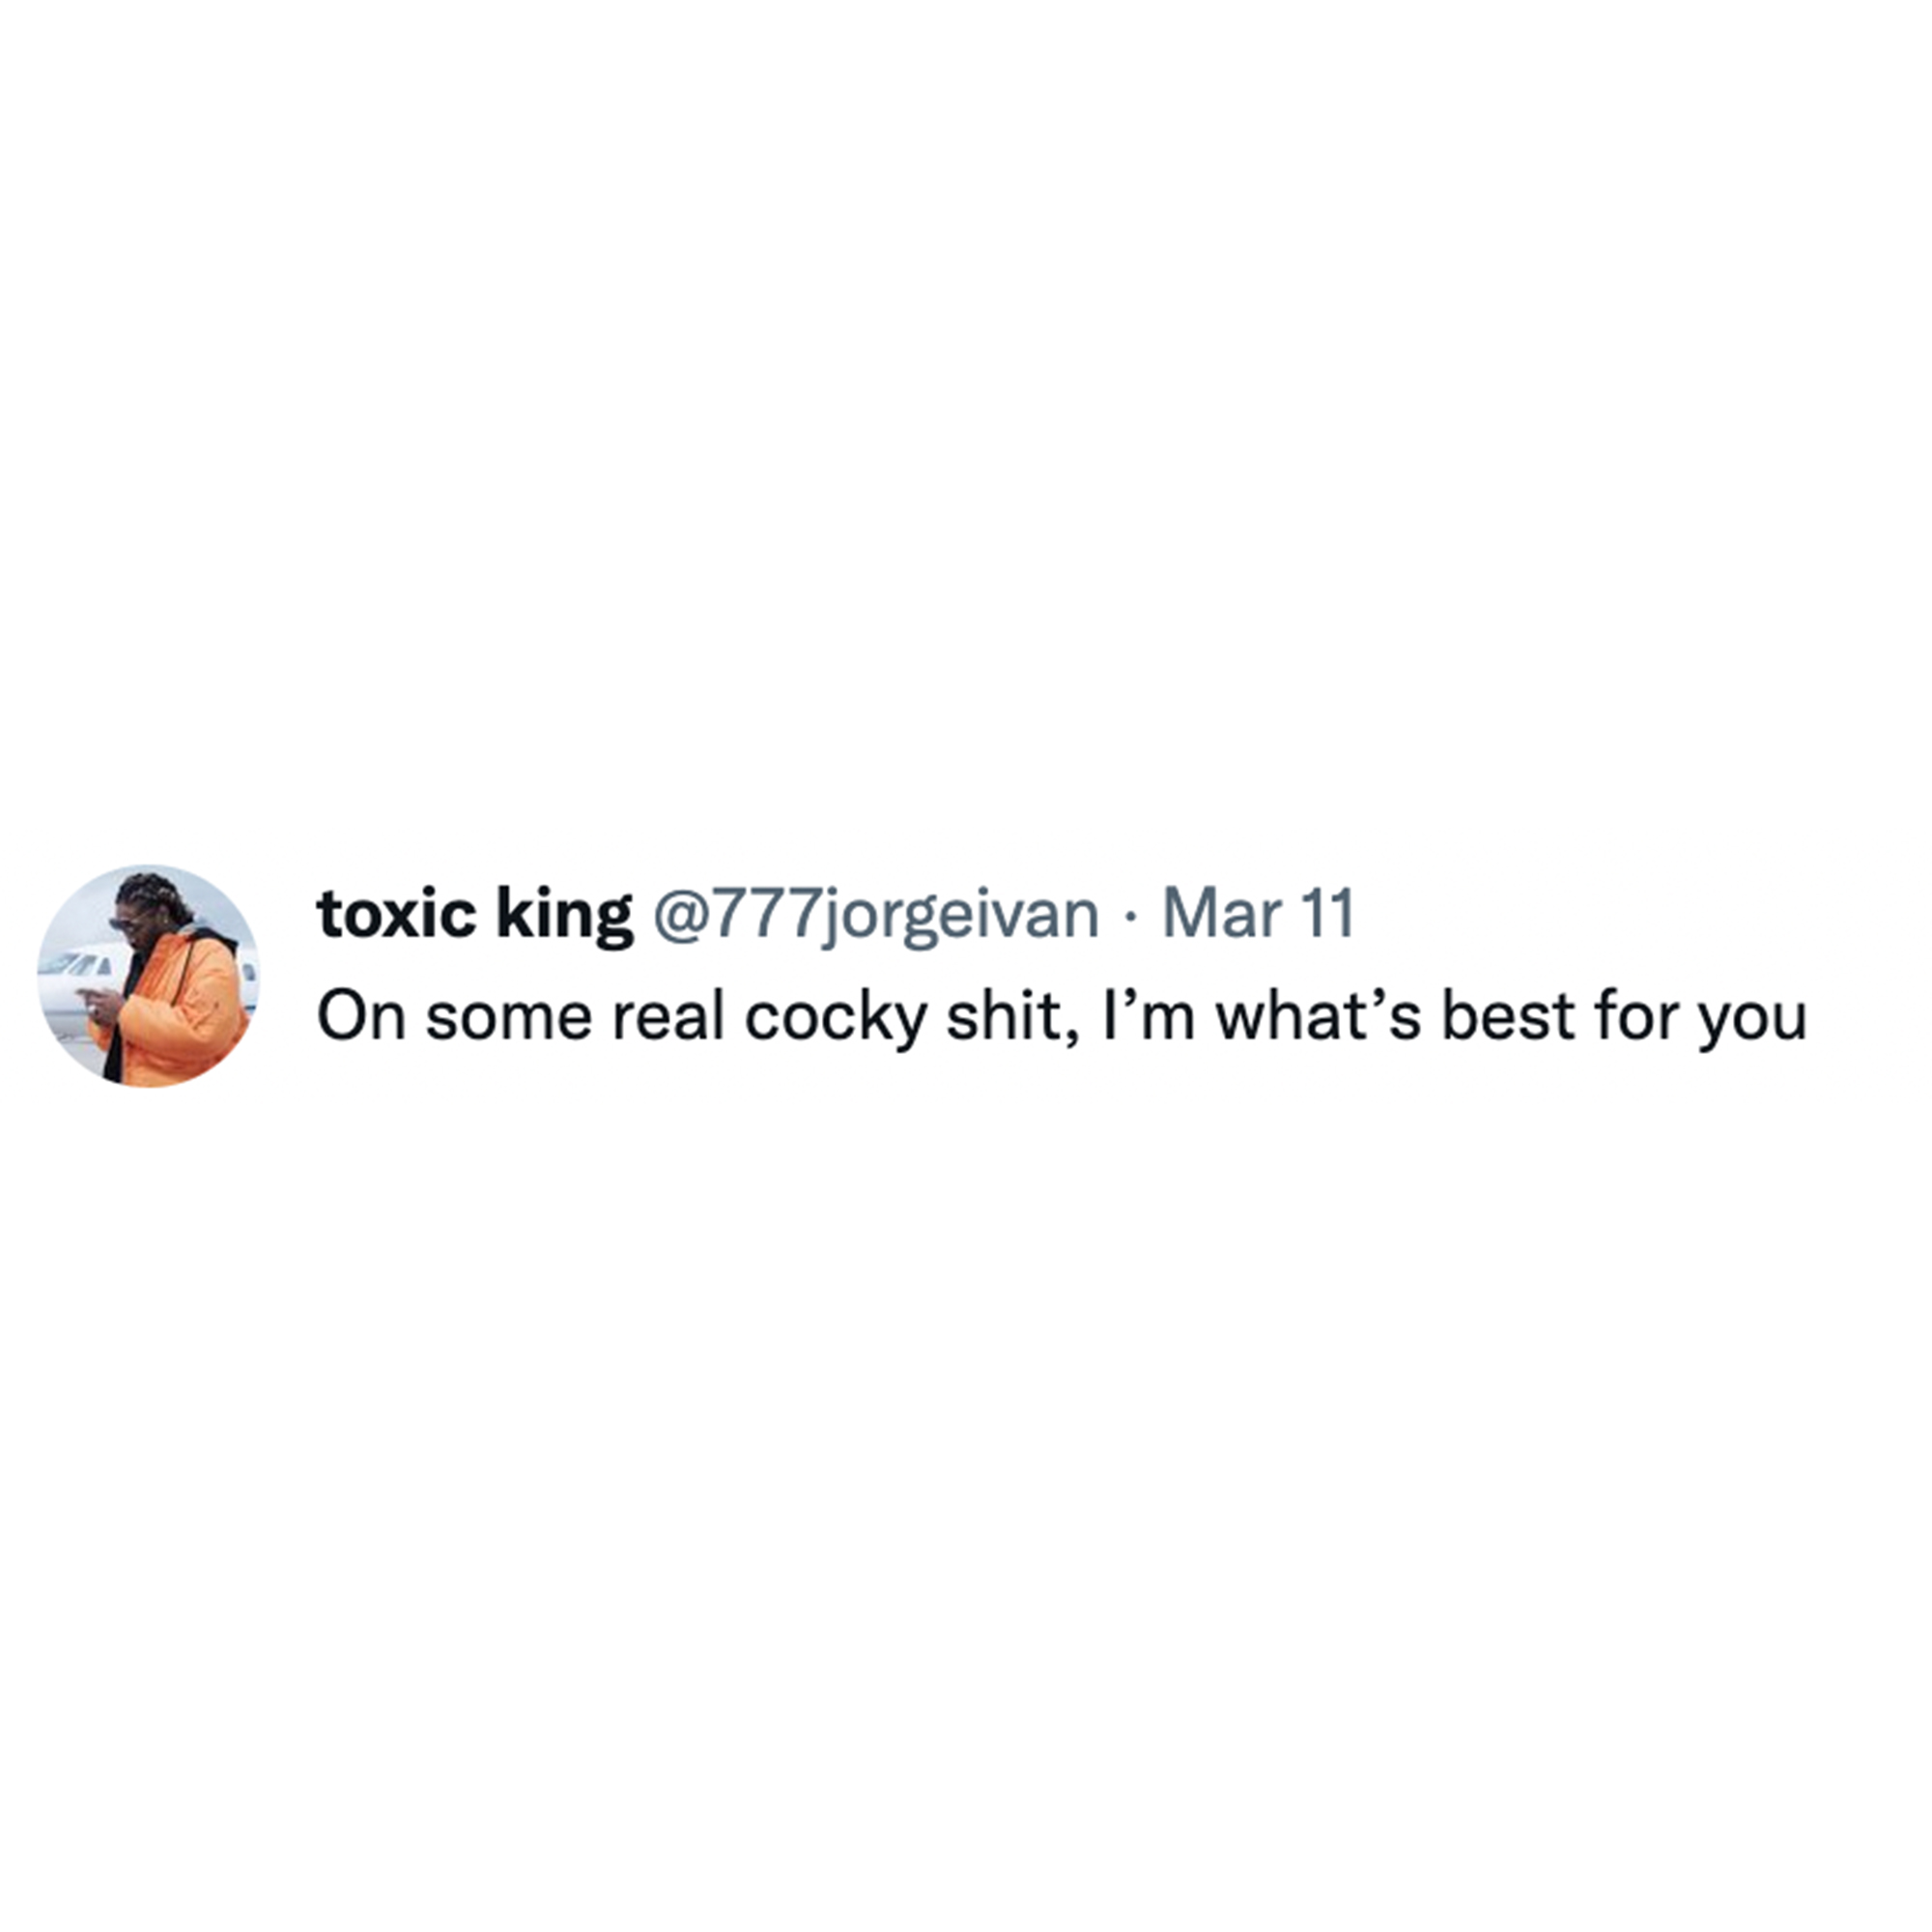 Toxic Memes and Tweets - graphics - toxic king . Mar 11 On some real cocky shit, I'm what's best for you